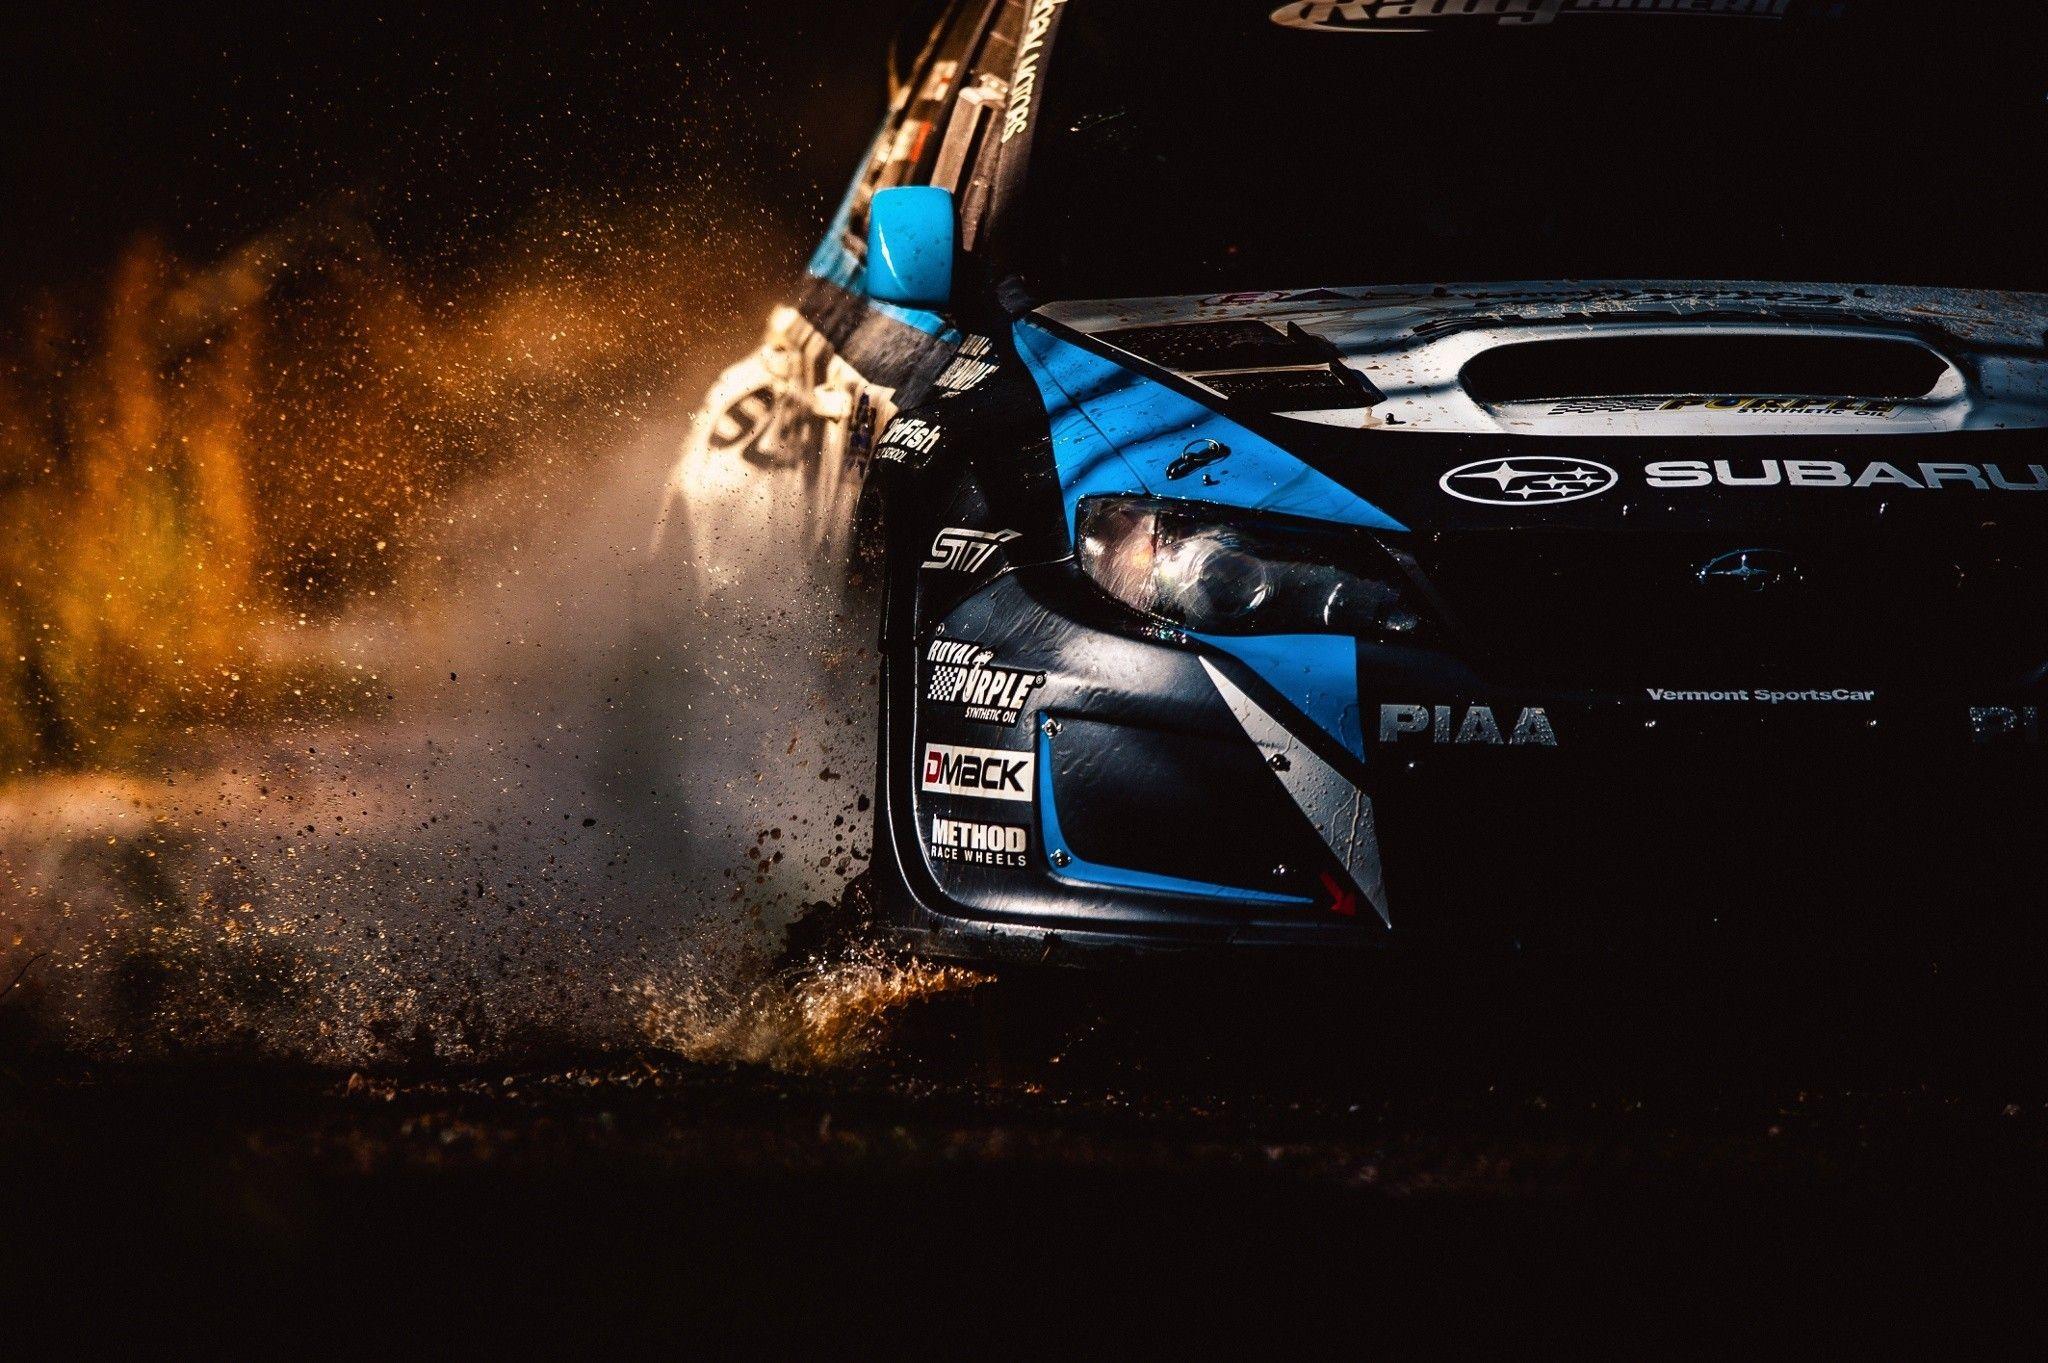 iphone xs dirt rally backgrounds